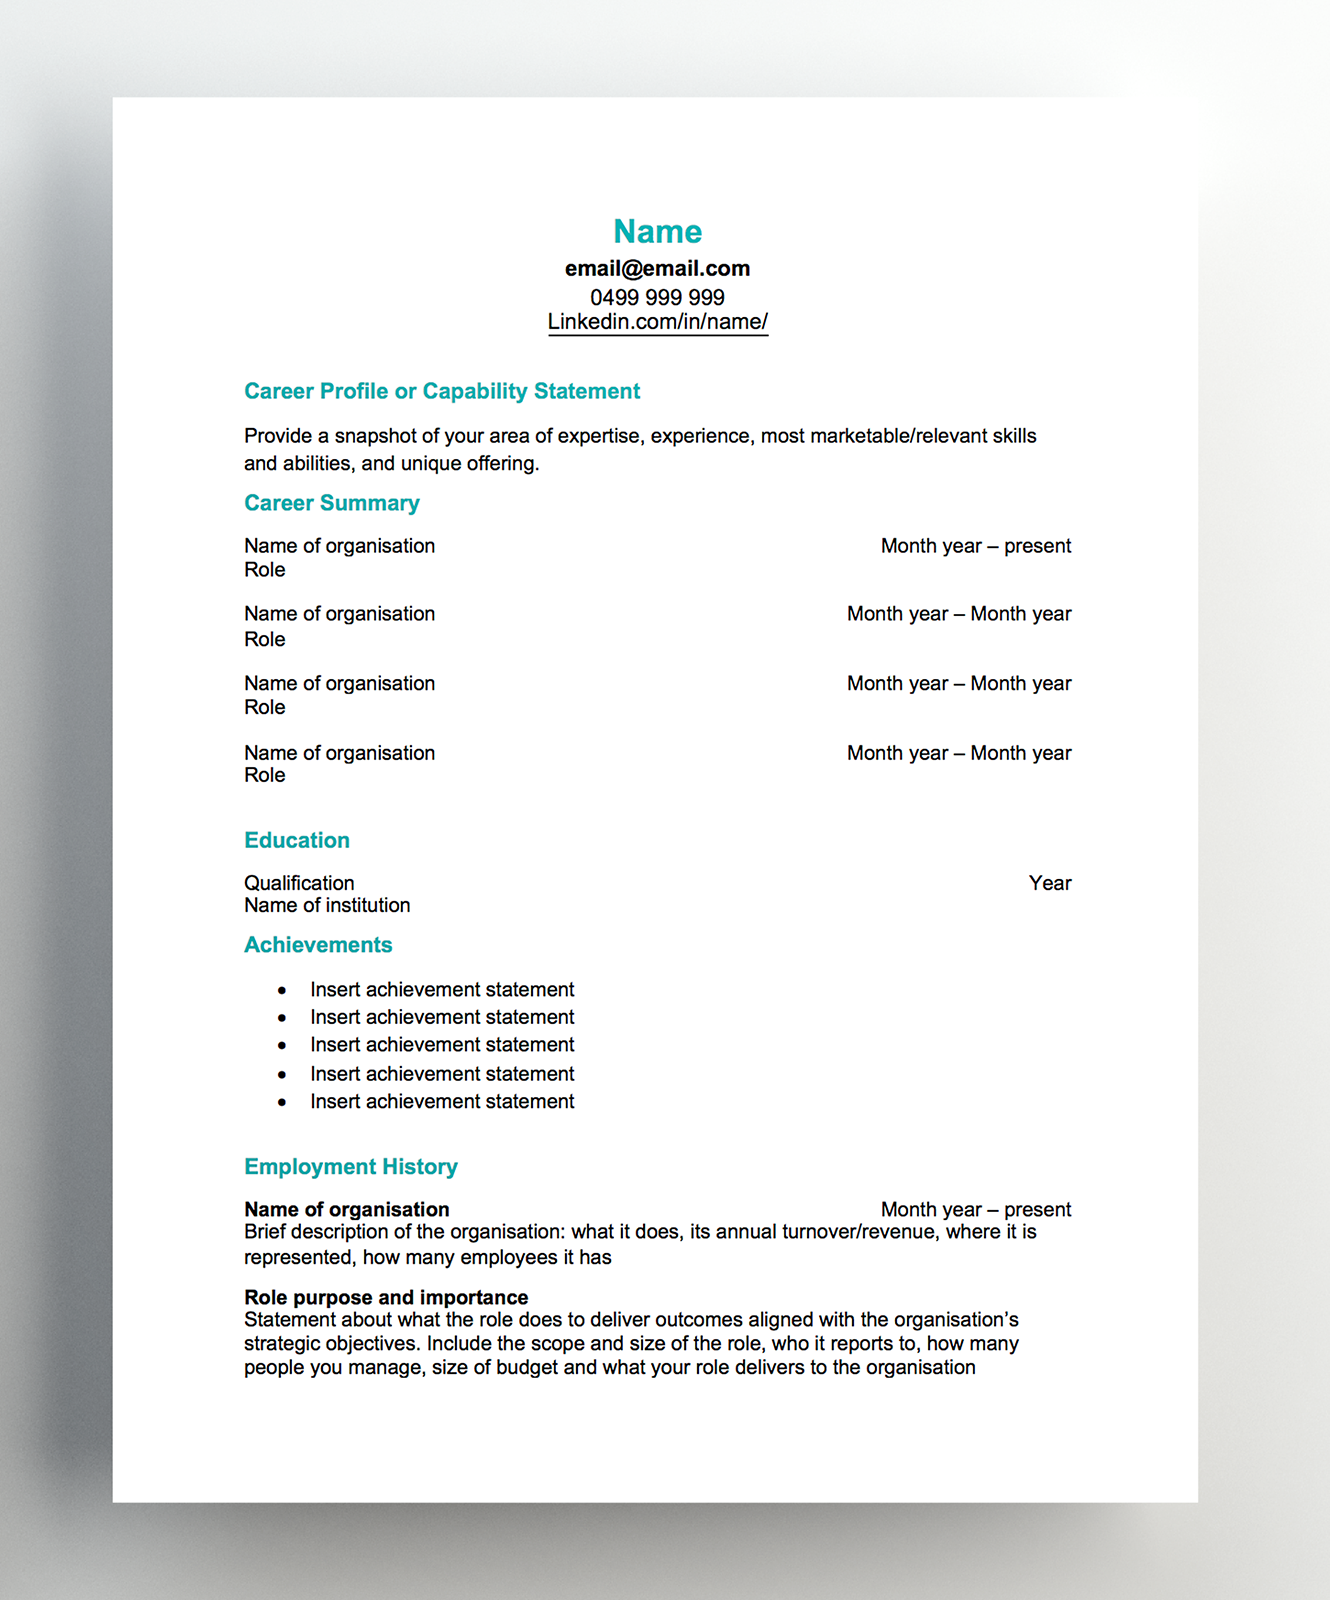 Free Resume Template Reverse Chronological Resume free resume template|wikiresume.com